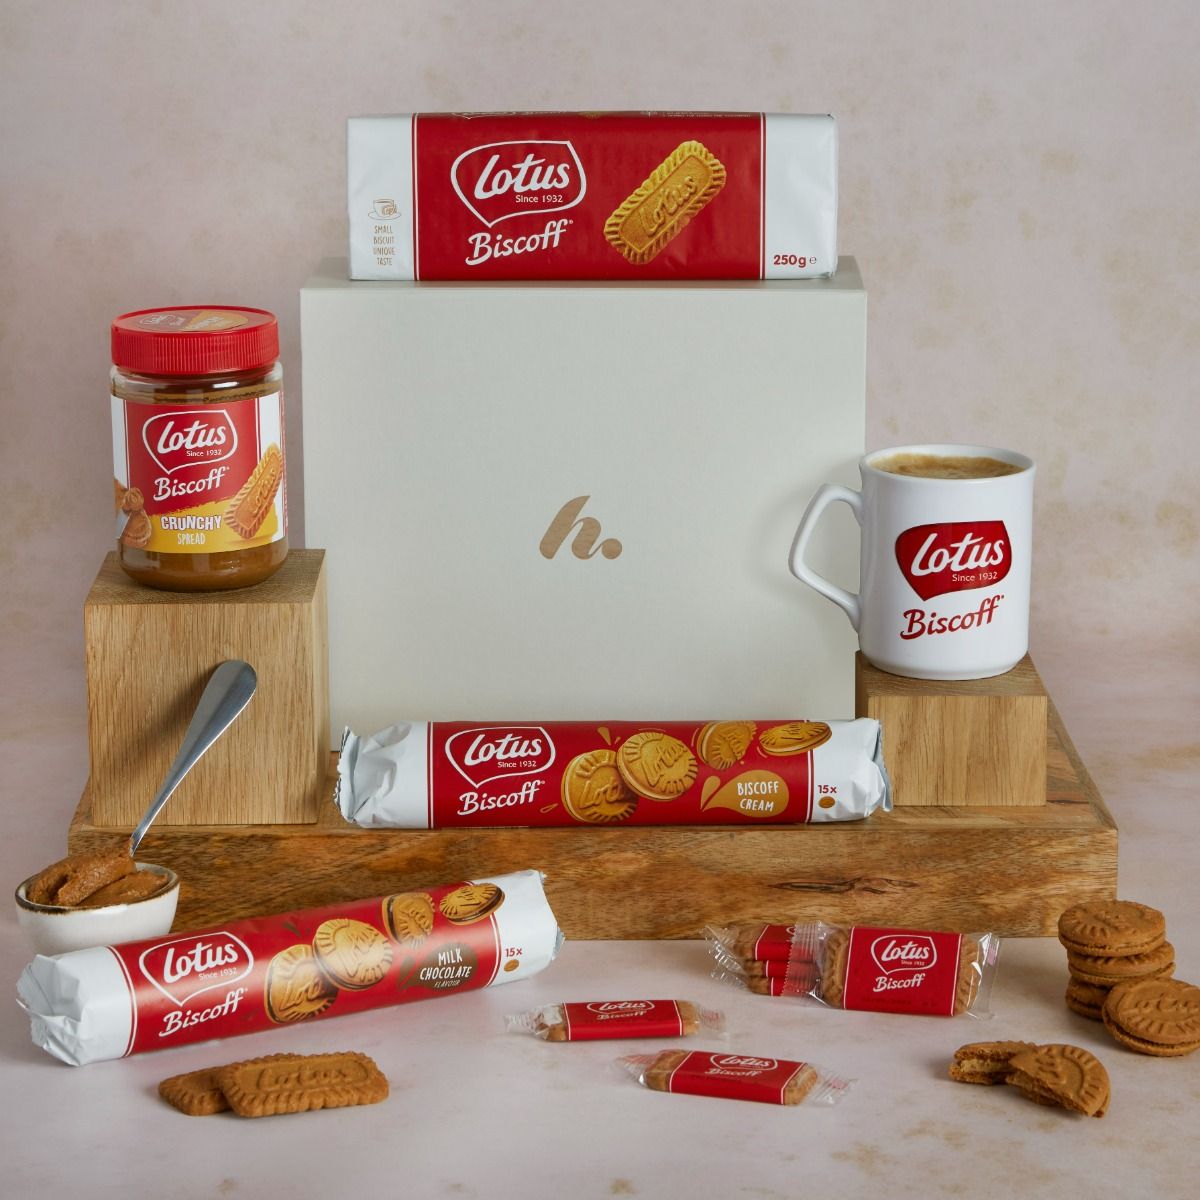 Lotus Biscoff hamper with lots of lotus biscoff products on display